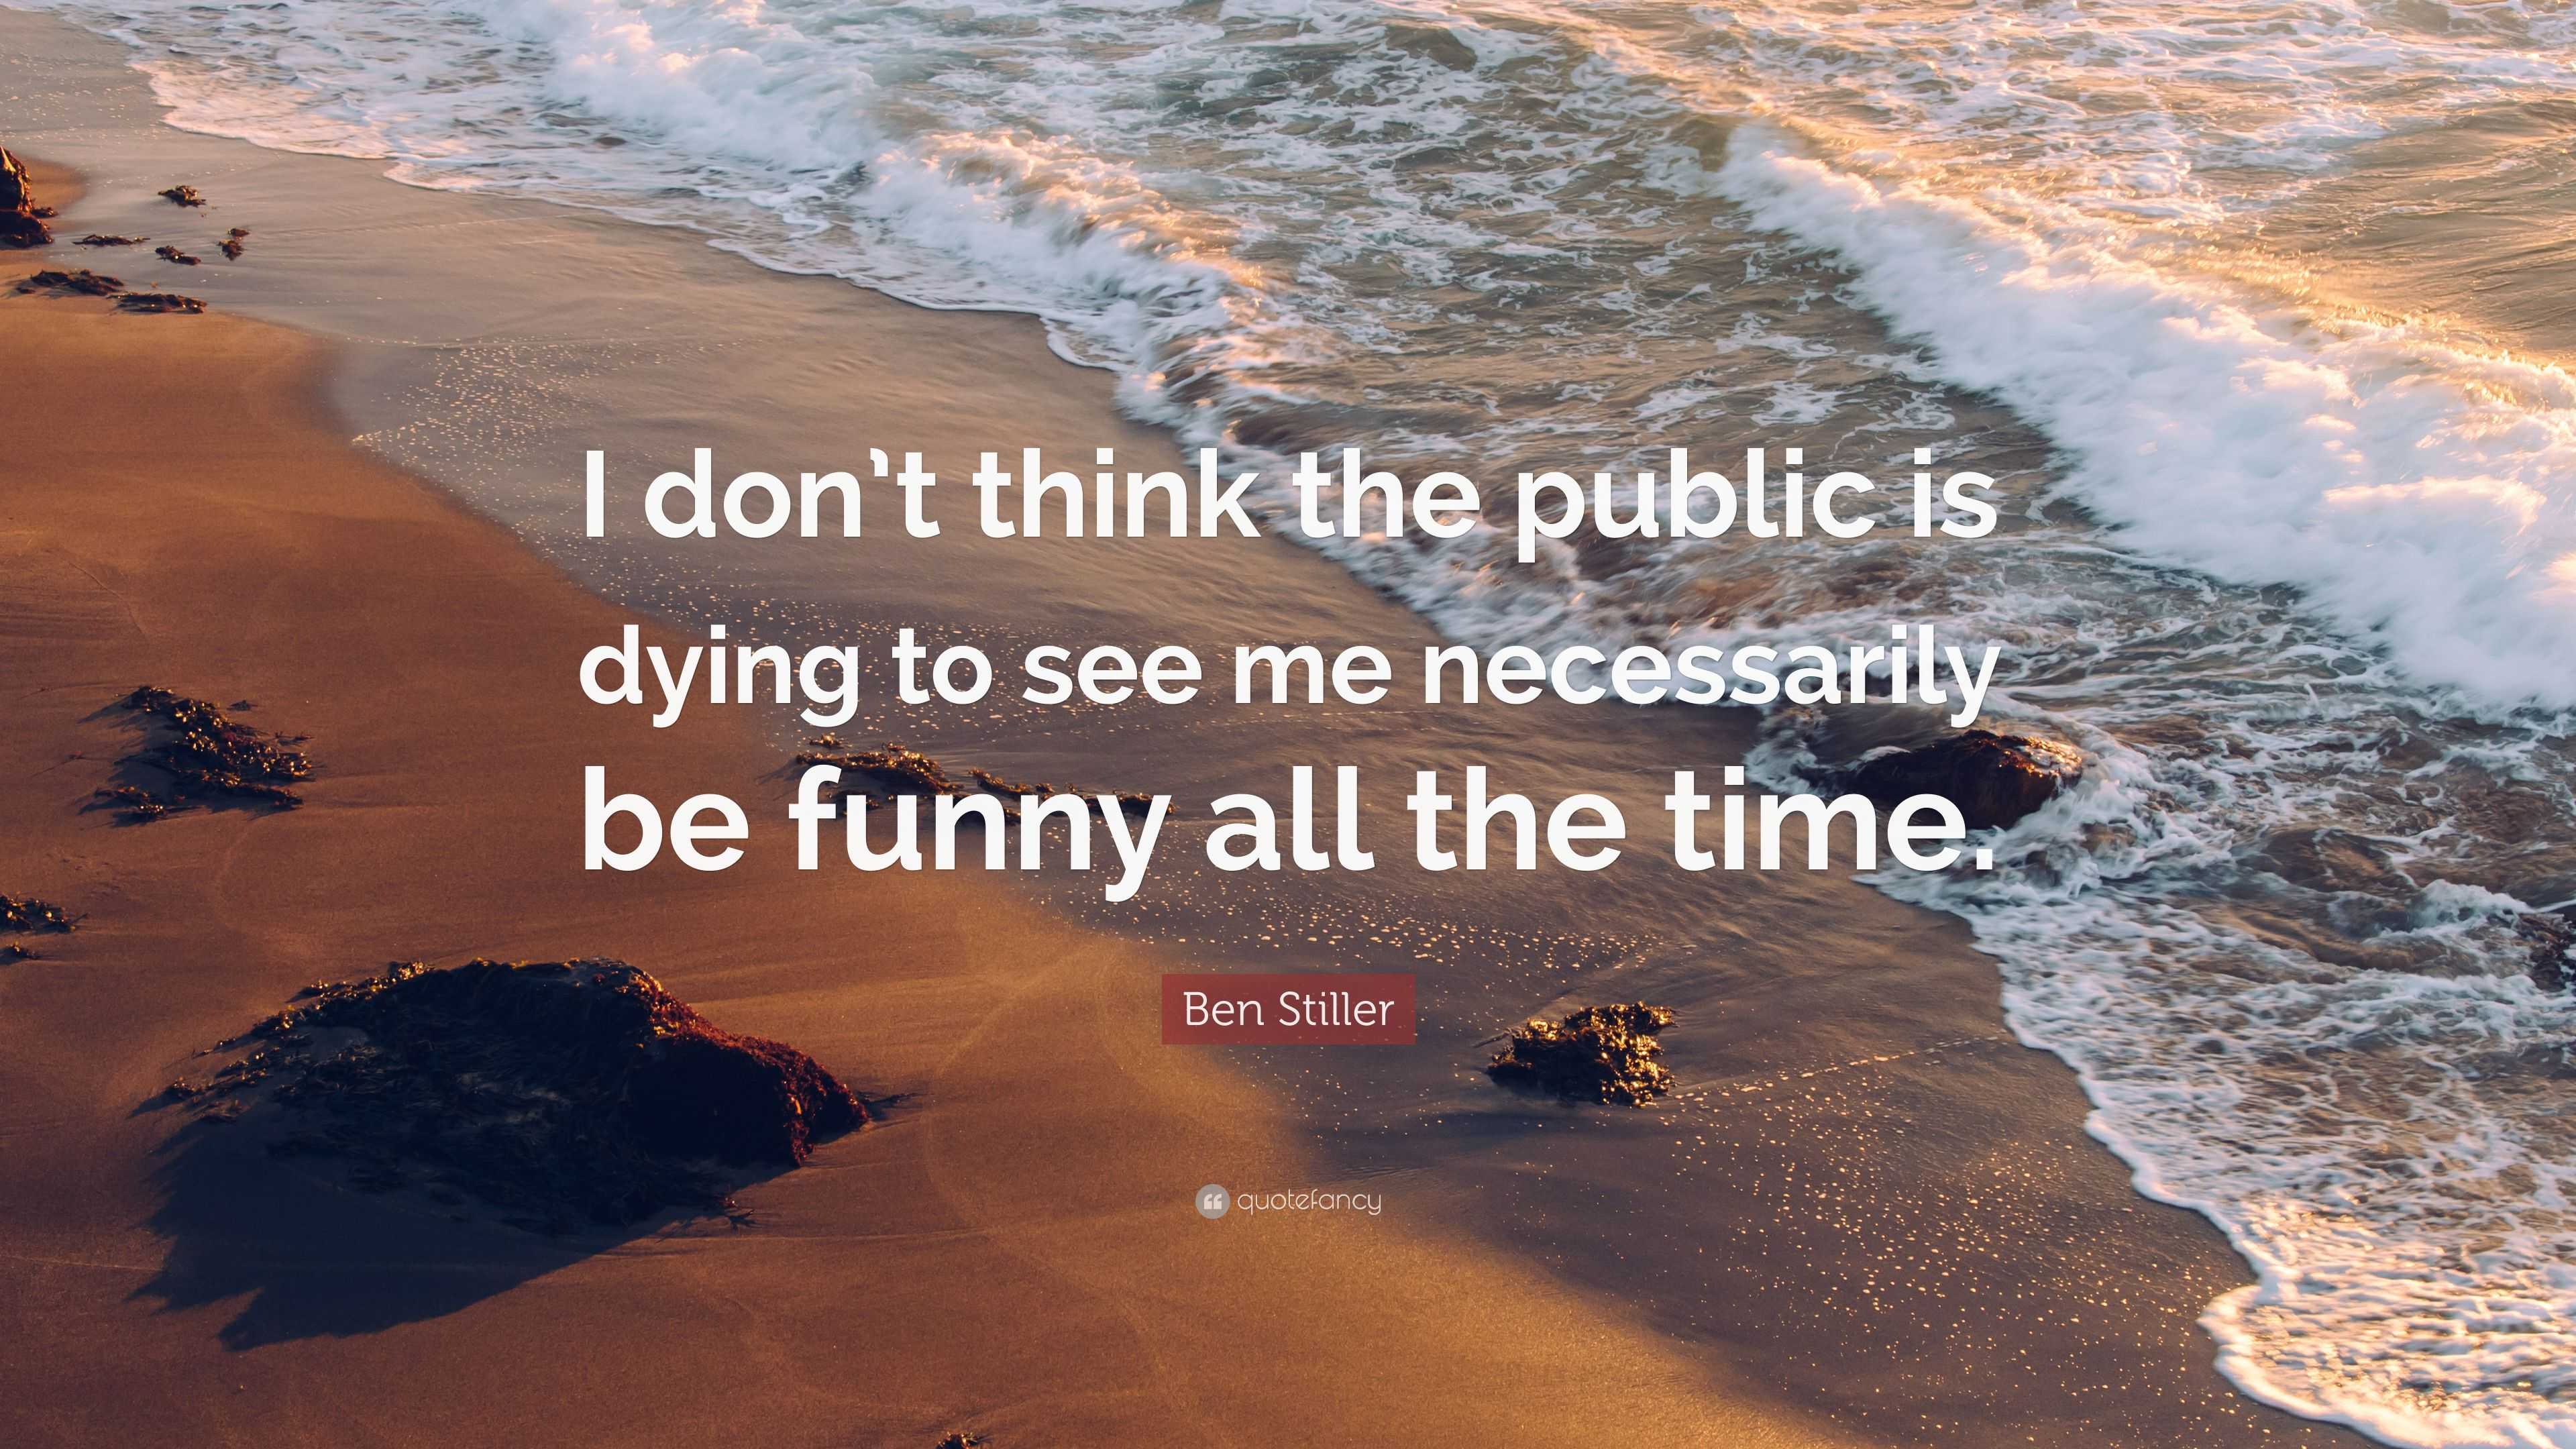 Ben Stiller Quote: “I don't think the public is dying to see me necessarily  be